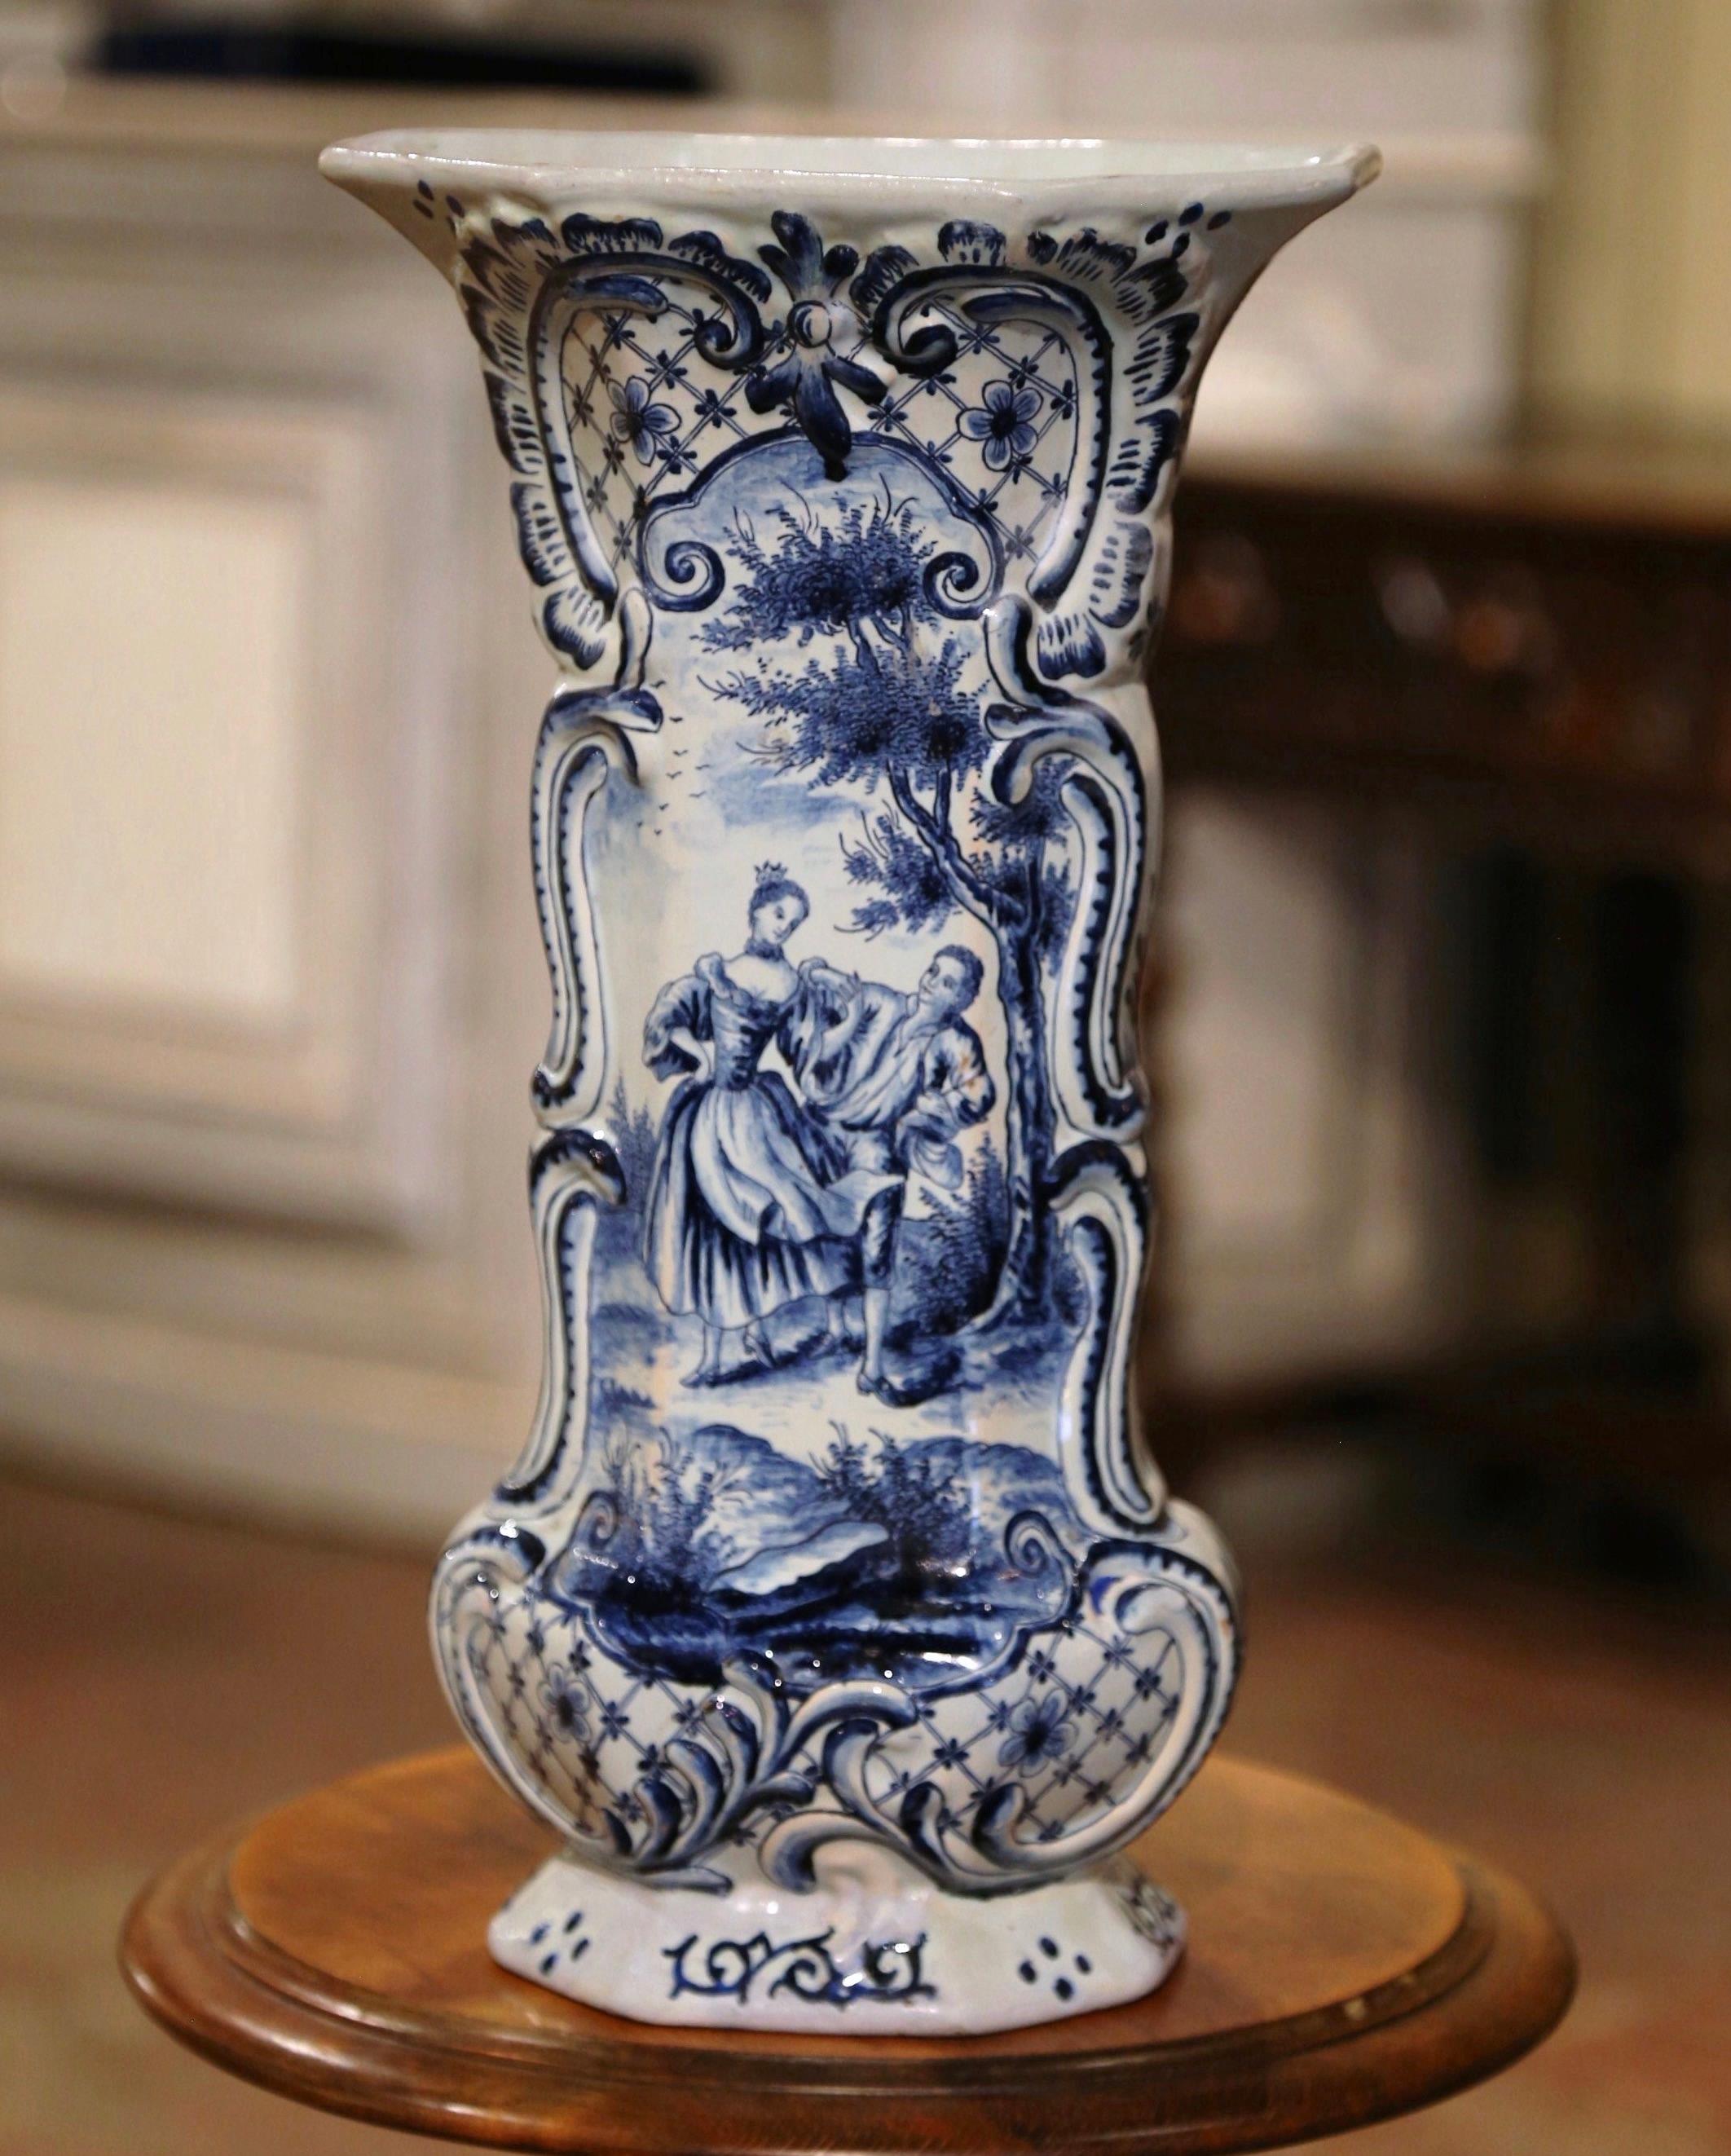  18th Century French Blue and White Hand Painted Faience Delft Vase In Excellent Condition For Sale In Dallas, TX